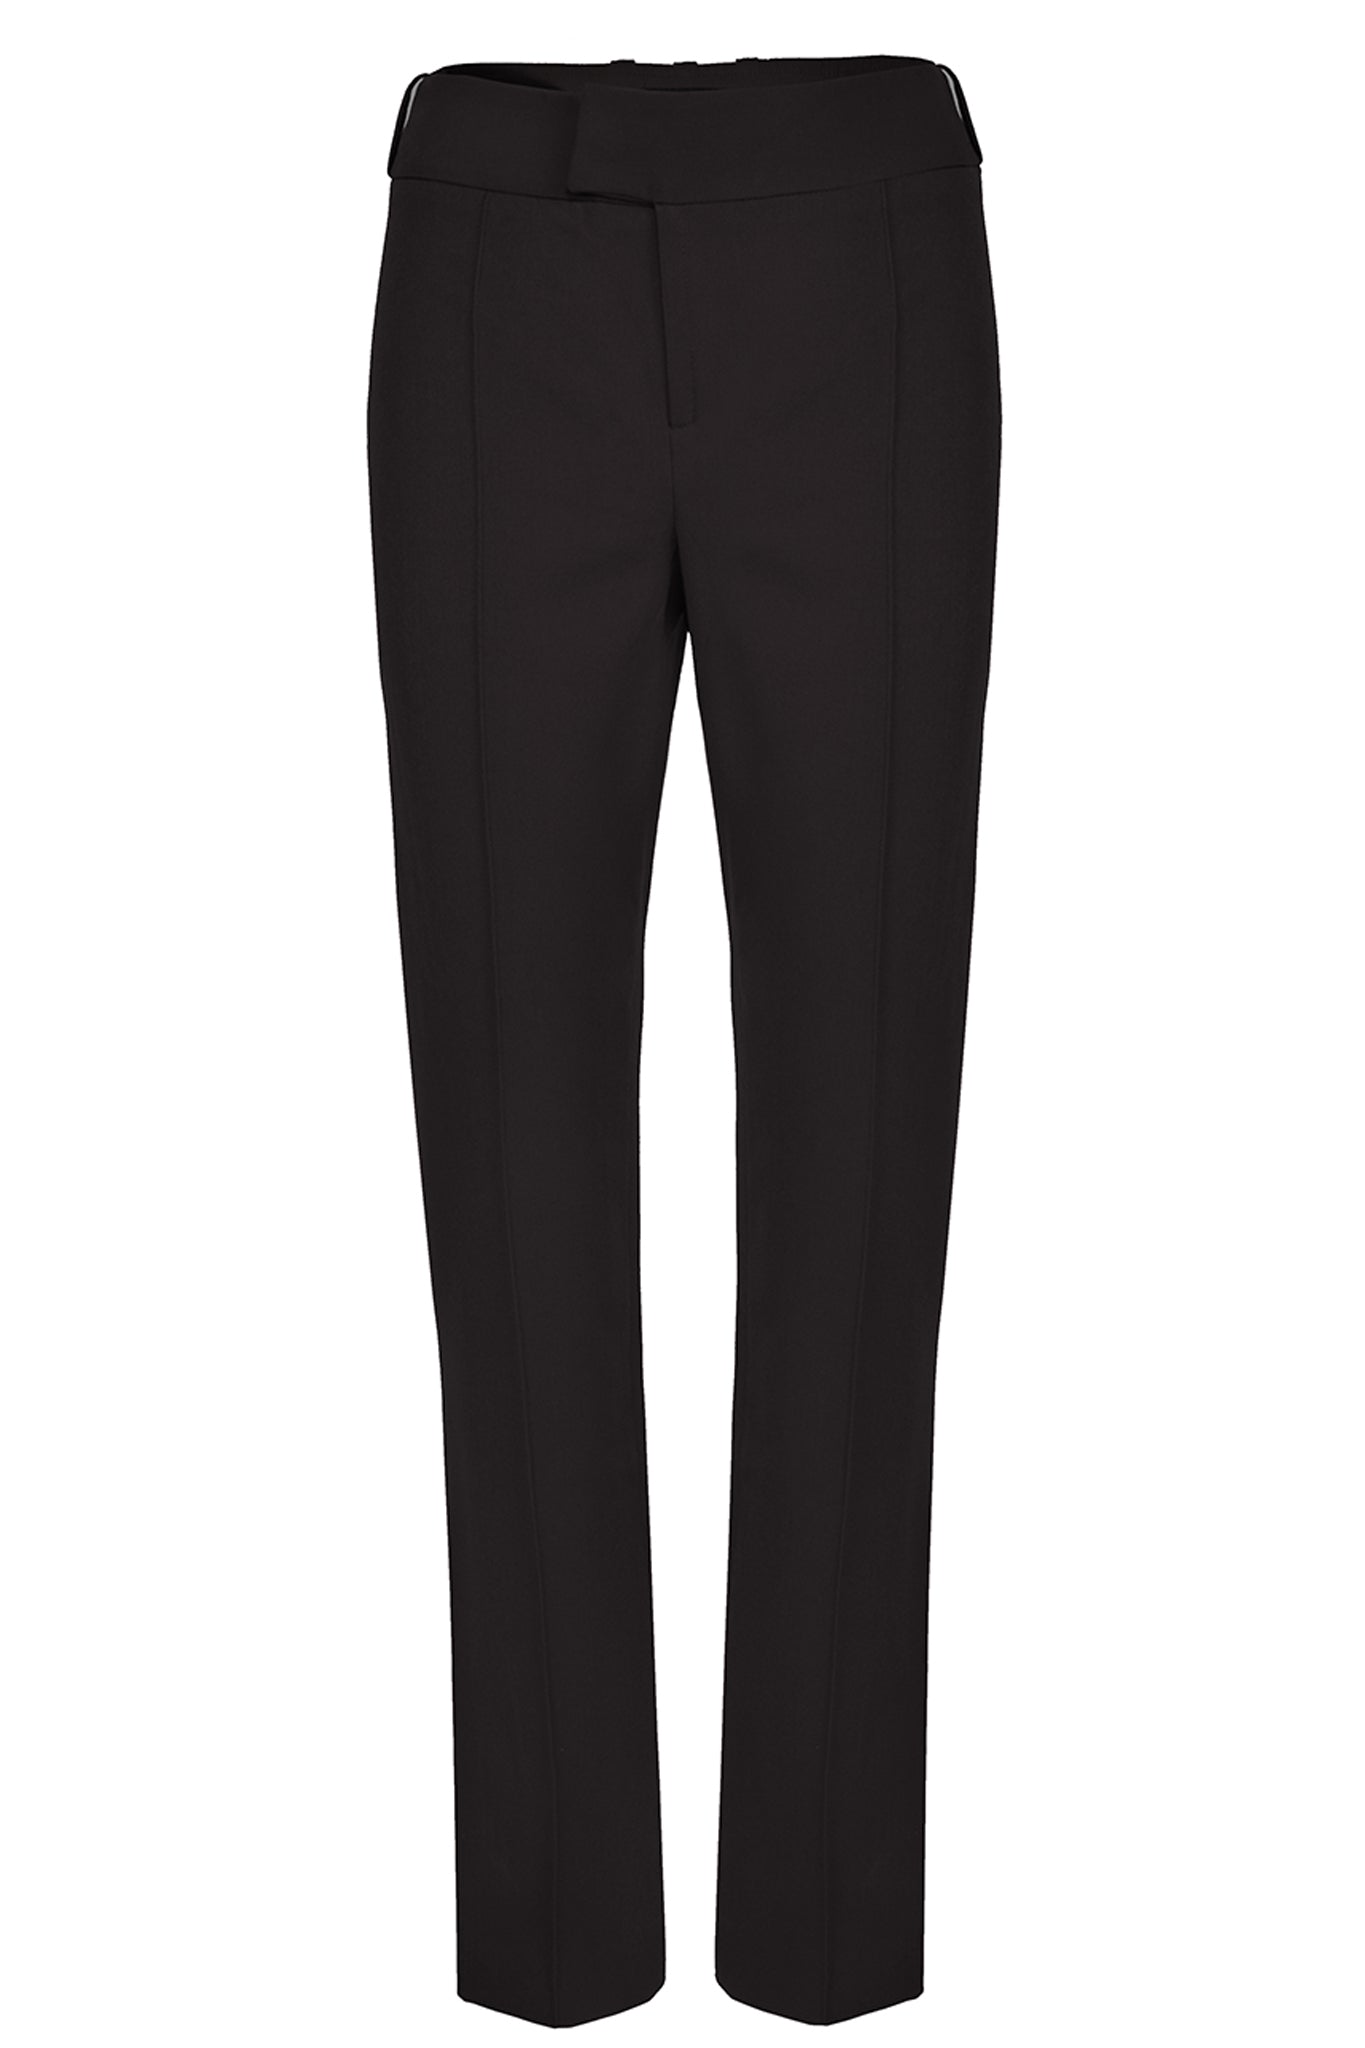 Black Cropped Cigarette Trousers